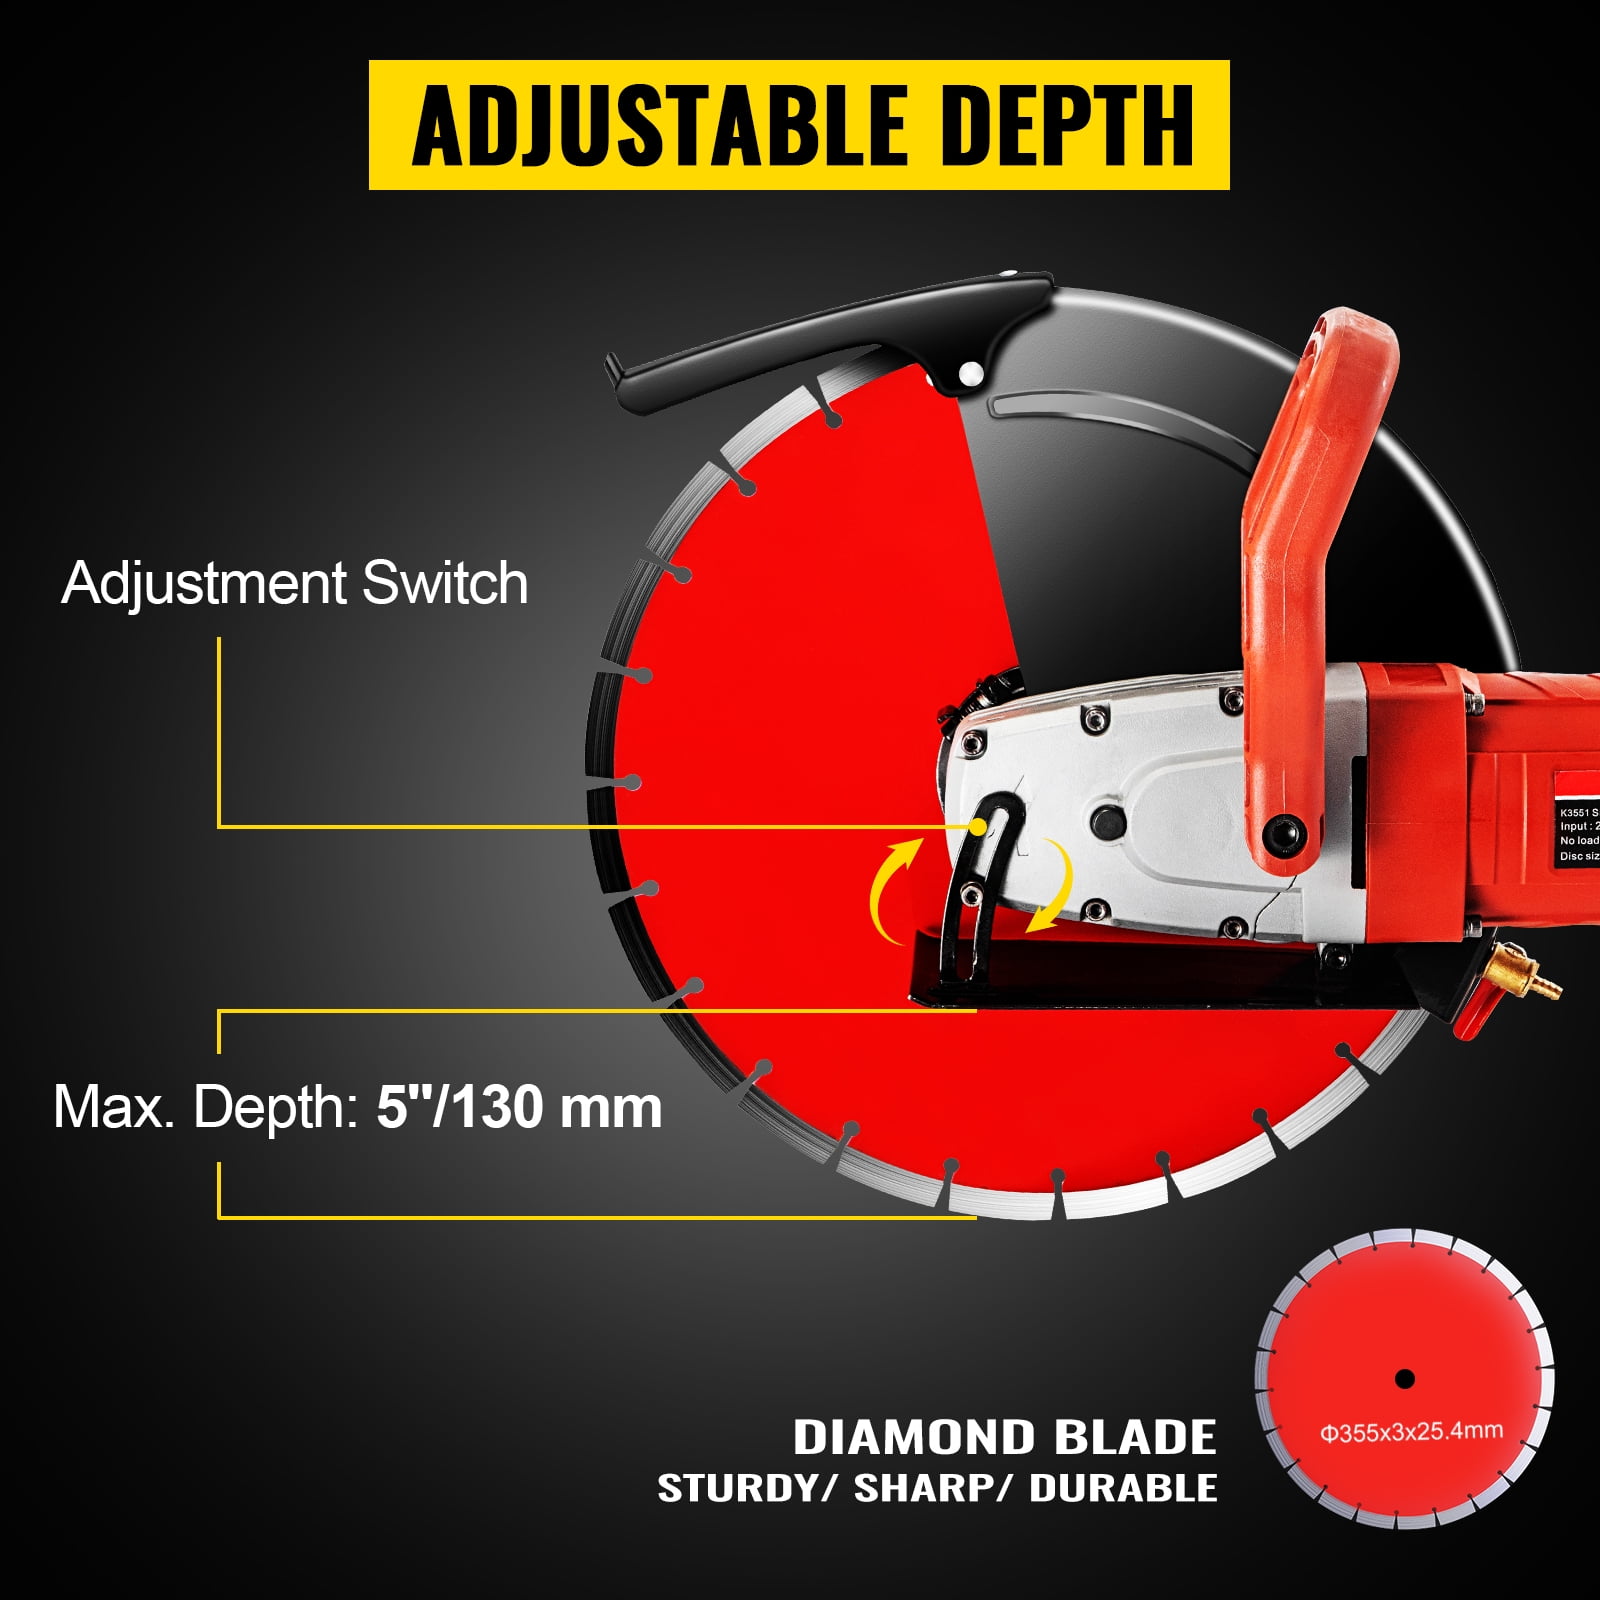 DNYSYSJ Electric Concrete Saw Cutter Circular Saw 14 Inch 3000W Wet Dry  Sawing with Blade and Tools for Granite, Brick, Porcelain, Reinforced  Concrete